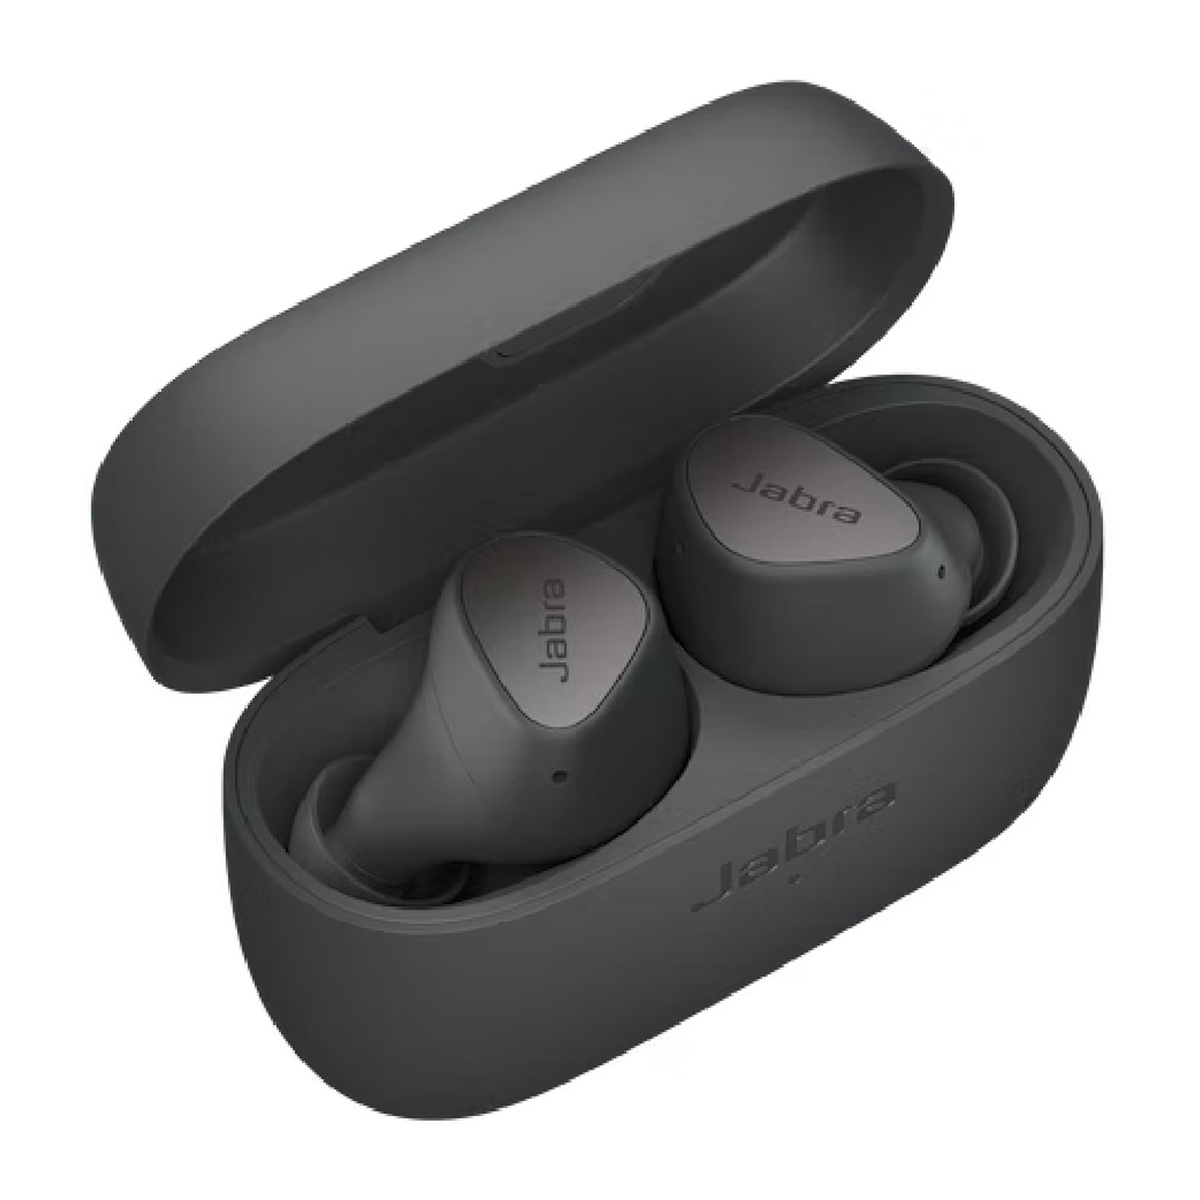 Jabra Elite 4 Essential earbuds for work and life Dark Gray